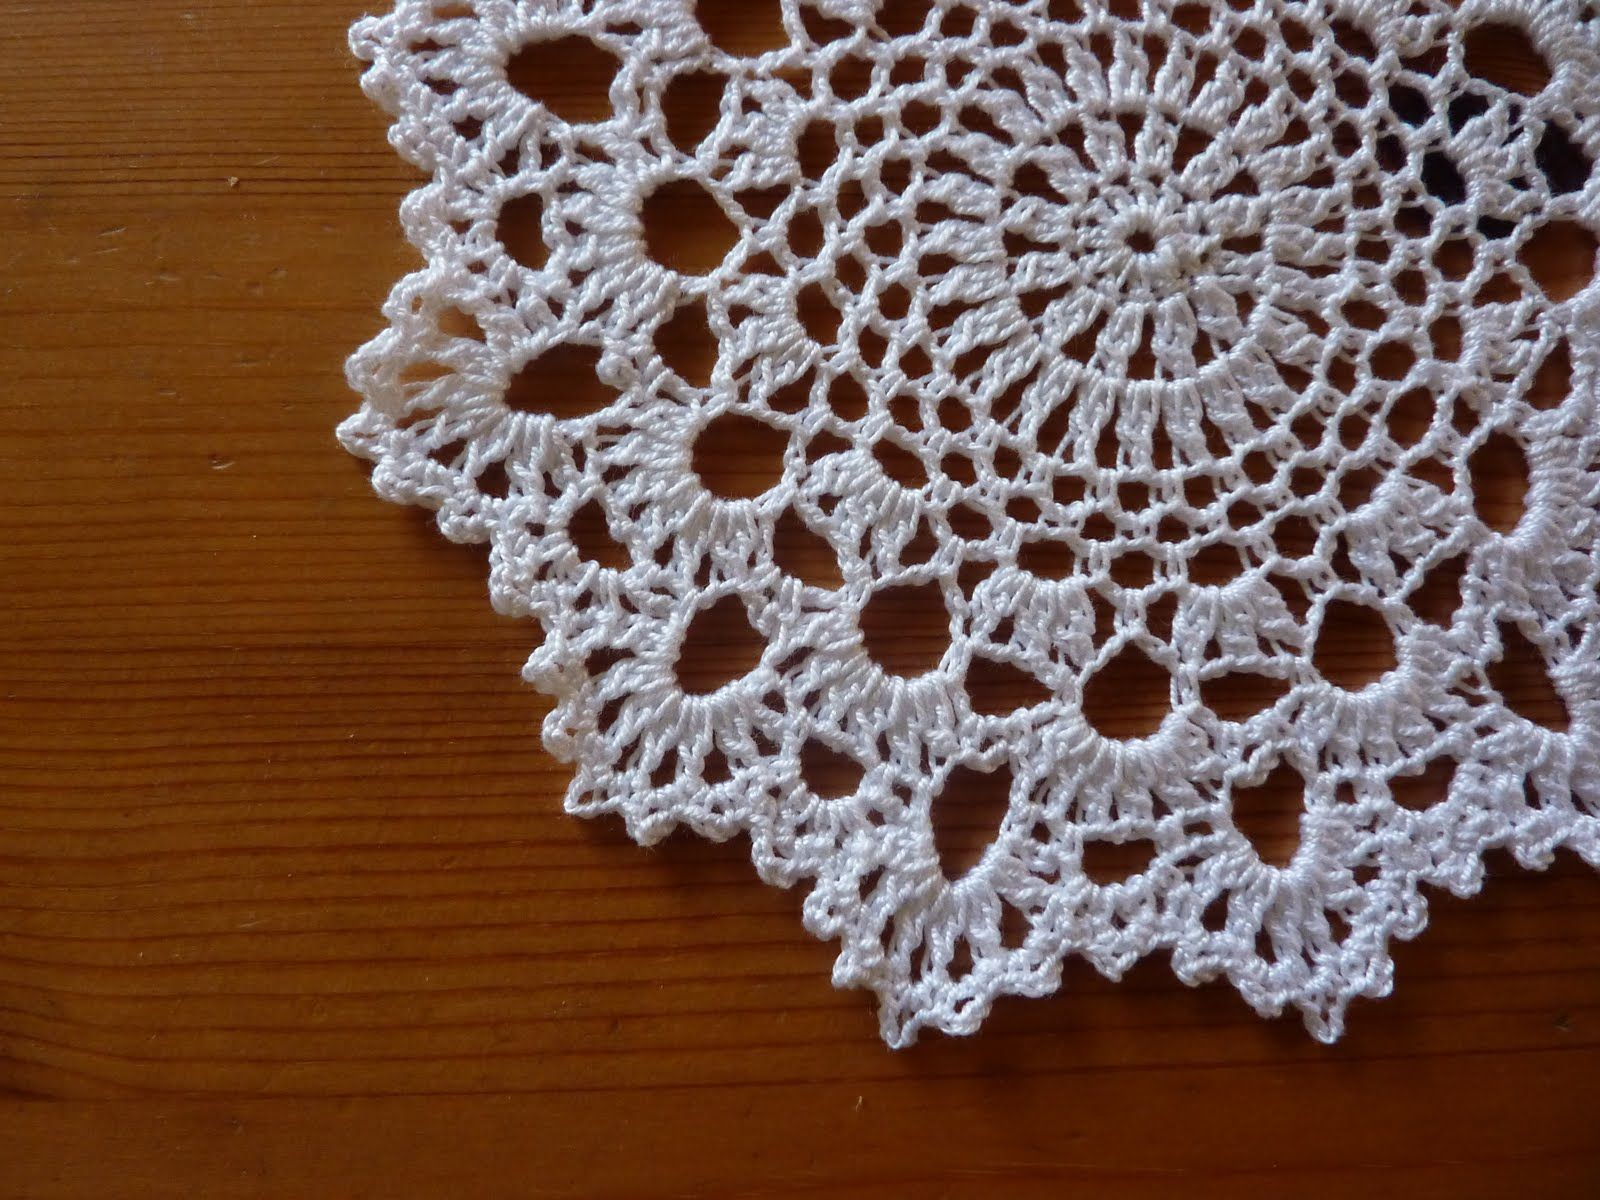 Crochet Doily Patterns Easy Crochet Doily For Beginners Very Pretty And So Easy To Make